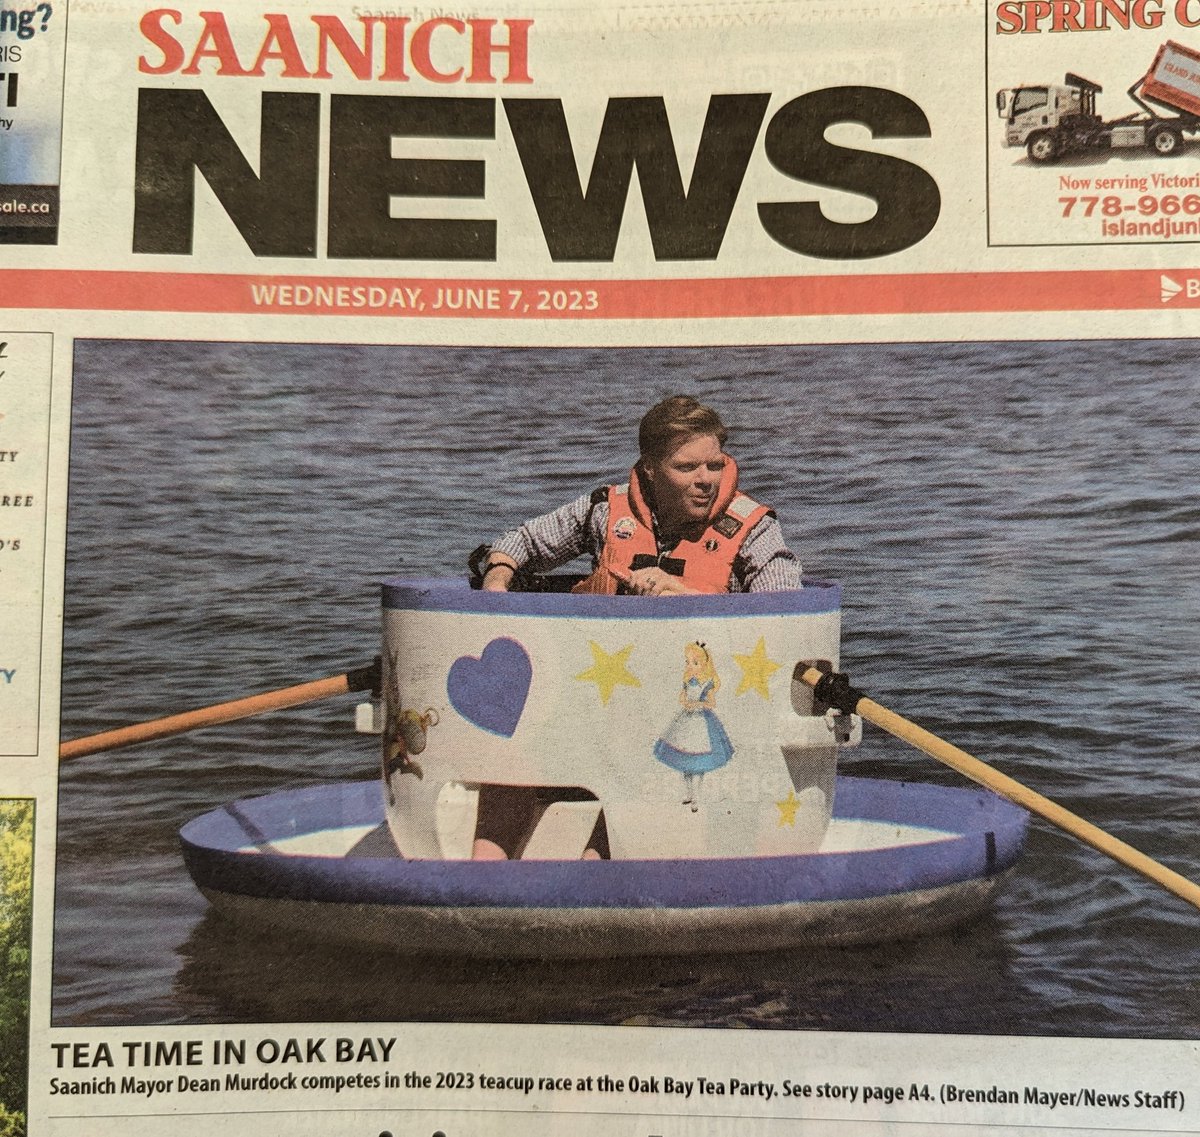 Great photo, @Dean_Murdock! And for a good cause.👍👏
#Saanich #MuniPoli